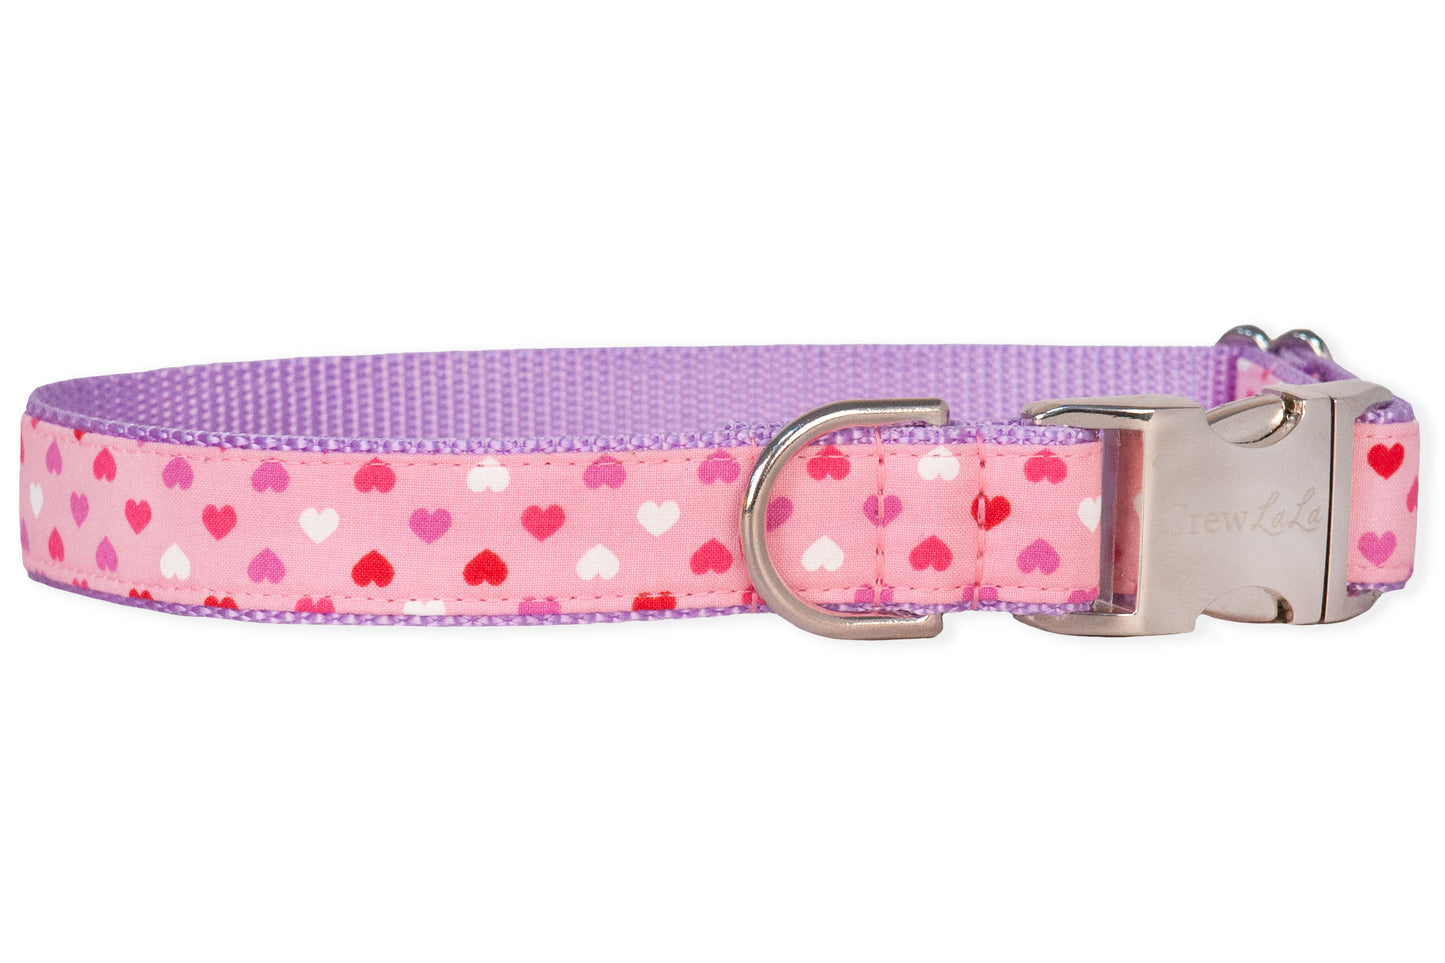 Candy Hearts Bow Tie Dog Collar - Crew LaLa